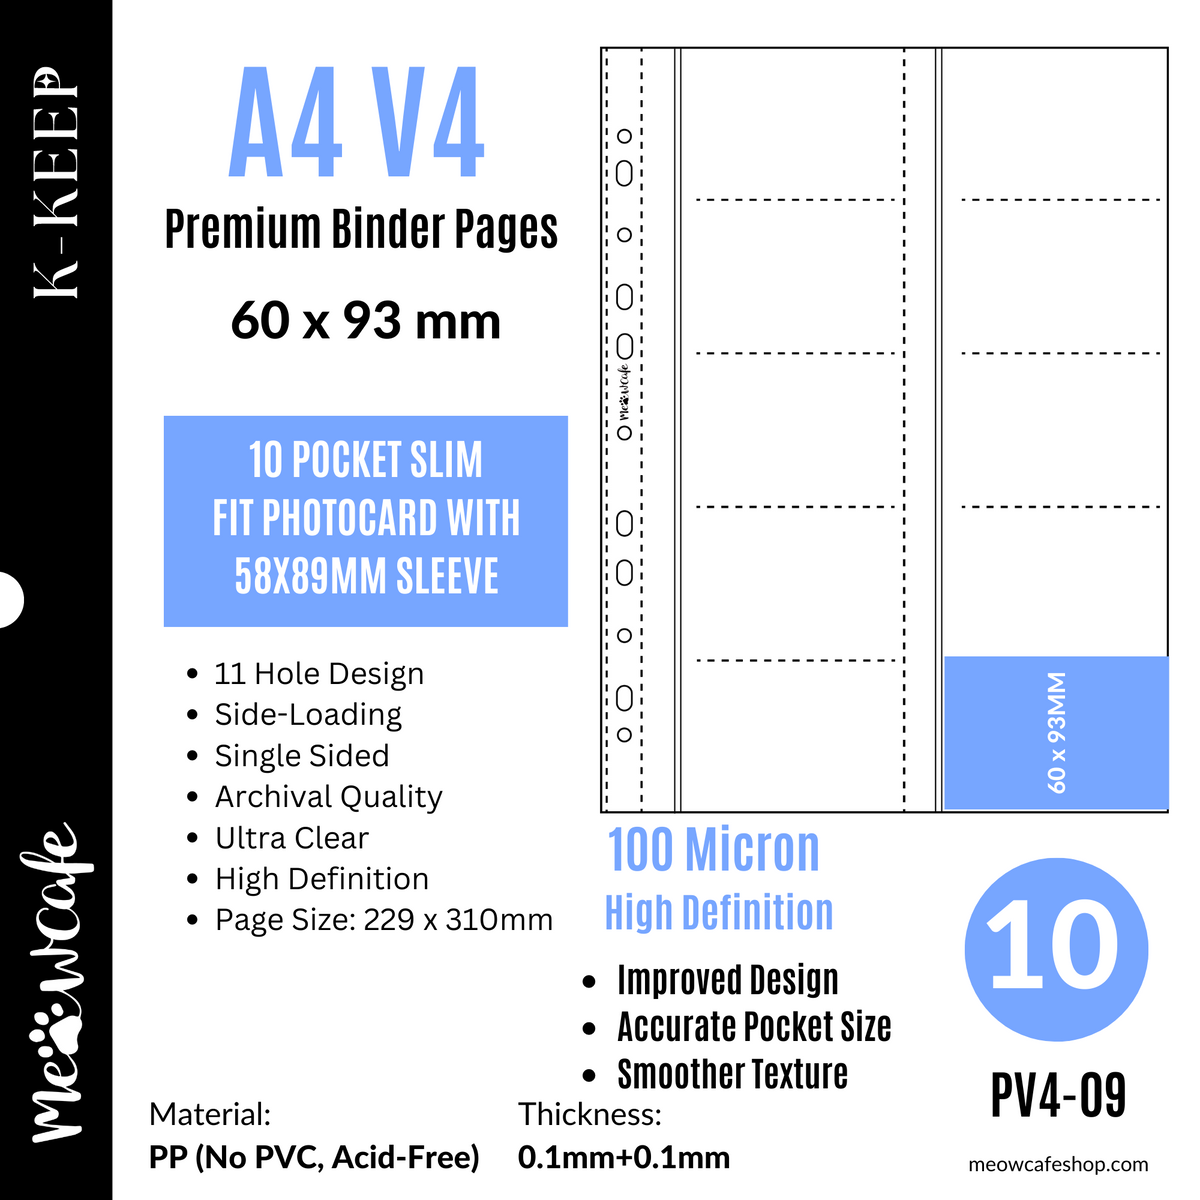 K-KEEP [A4 V4] -  10 Pocket Slim (60x93mm) - 11 Holes Premium Binder Pages, 100 Micron Thick, High Definition (Pack of 10) - (PV4-09)